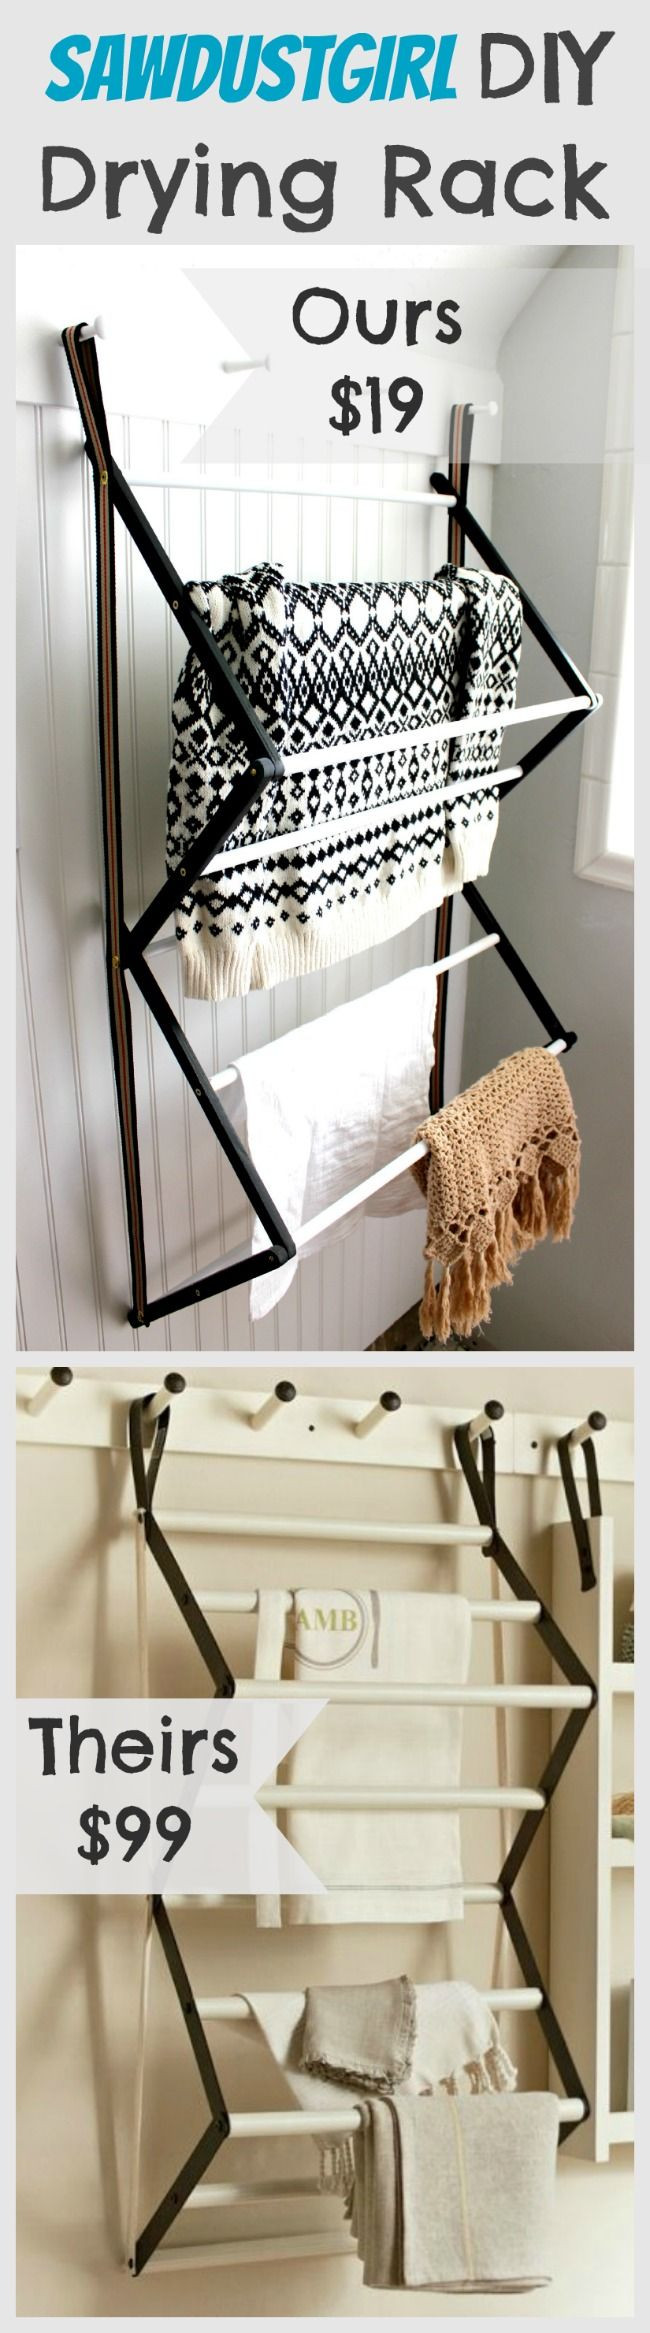 DIY Laundry Rack
 Diy Laundry Drying Rack WoodWorking Projects & Plans